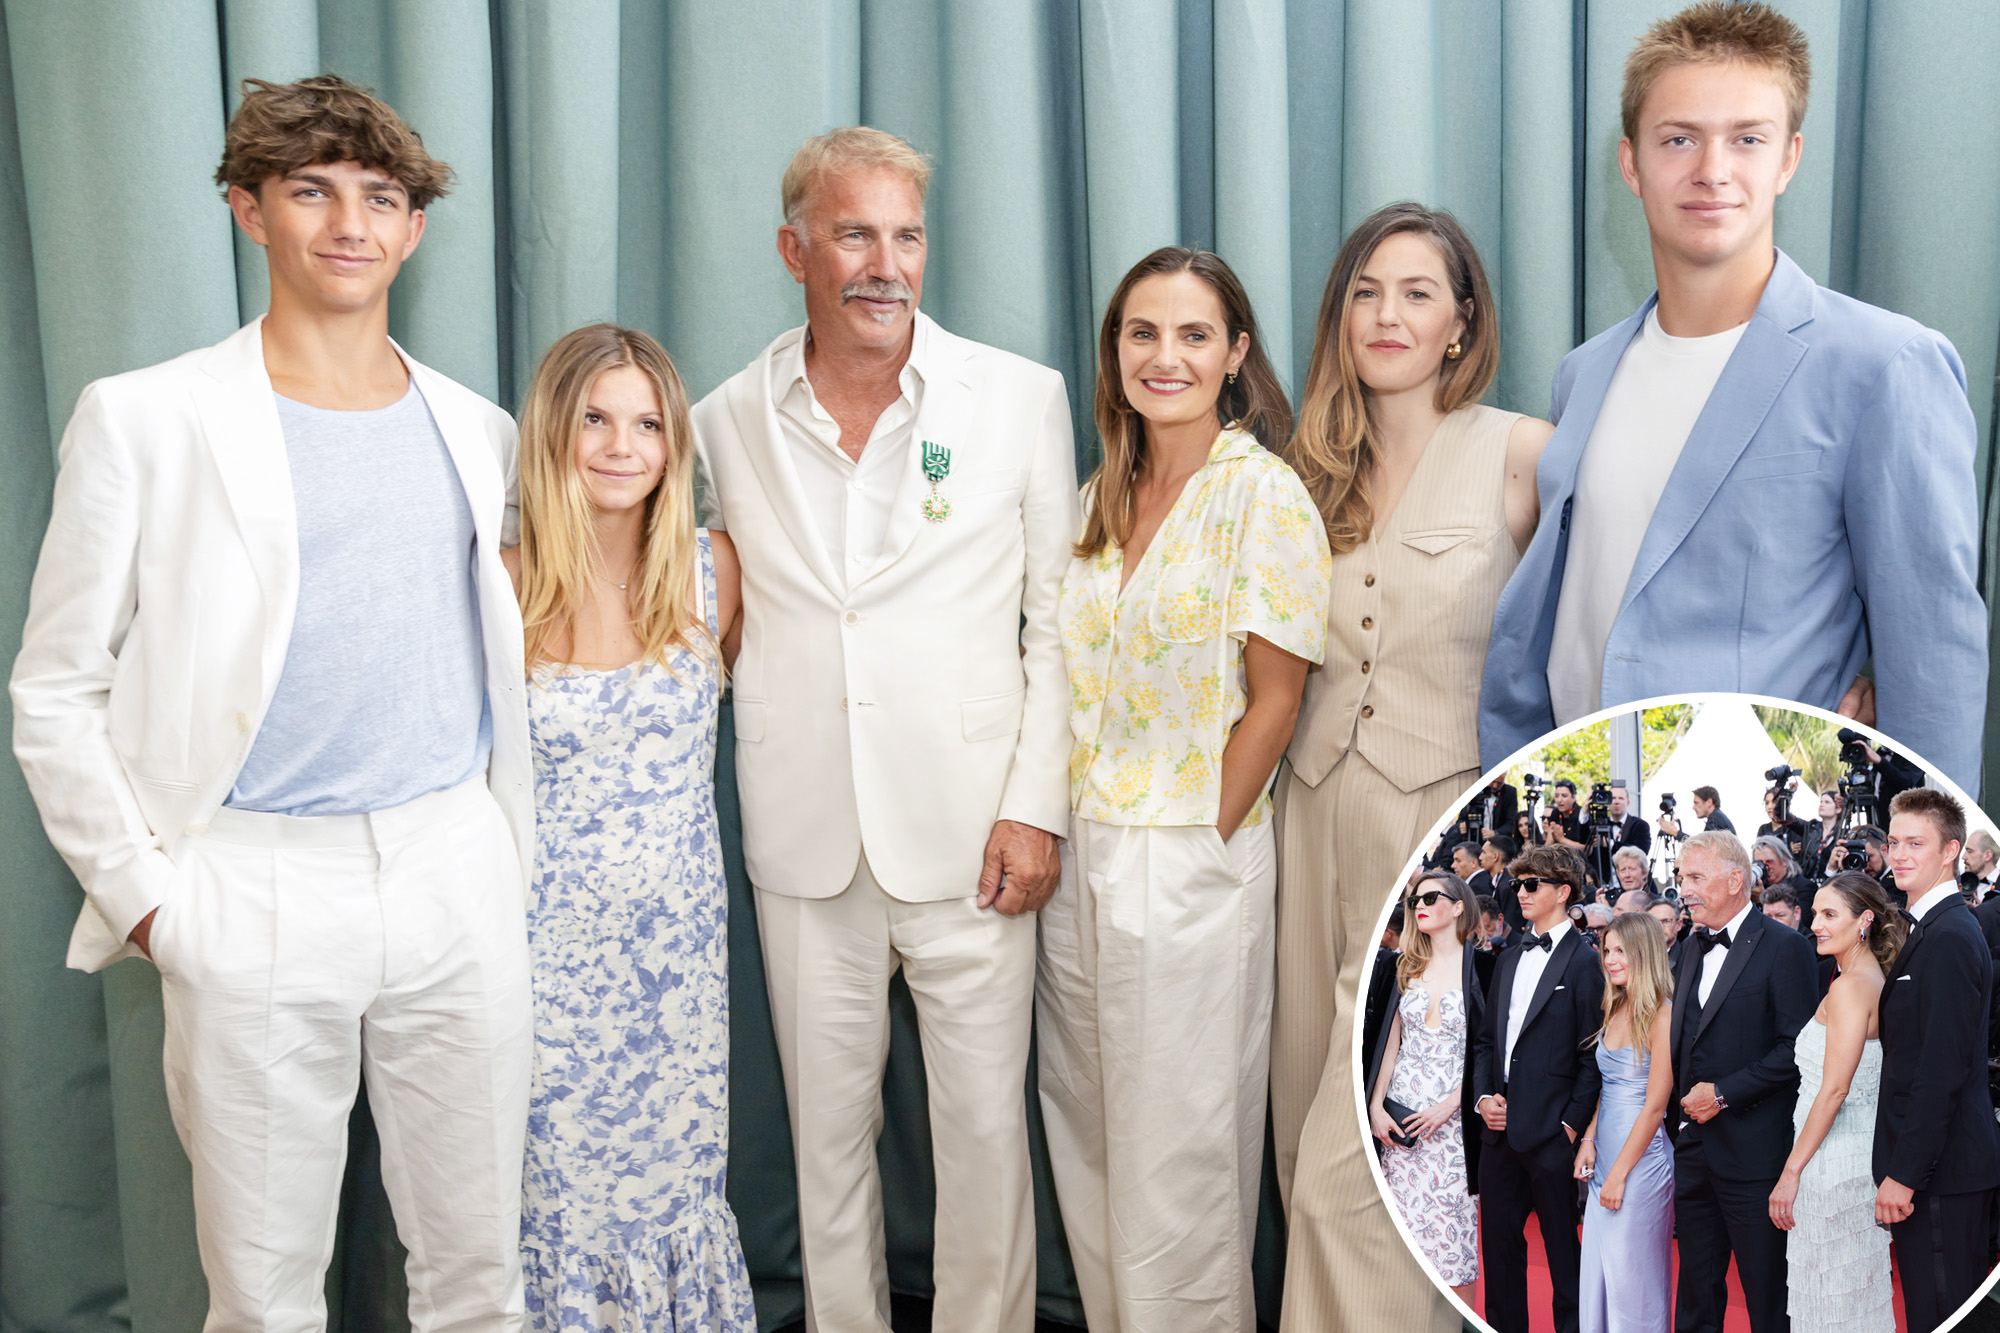 Kevin Costner's Family Affair at Cannes Film Festival